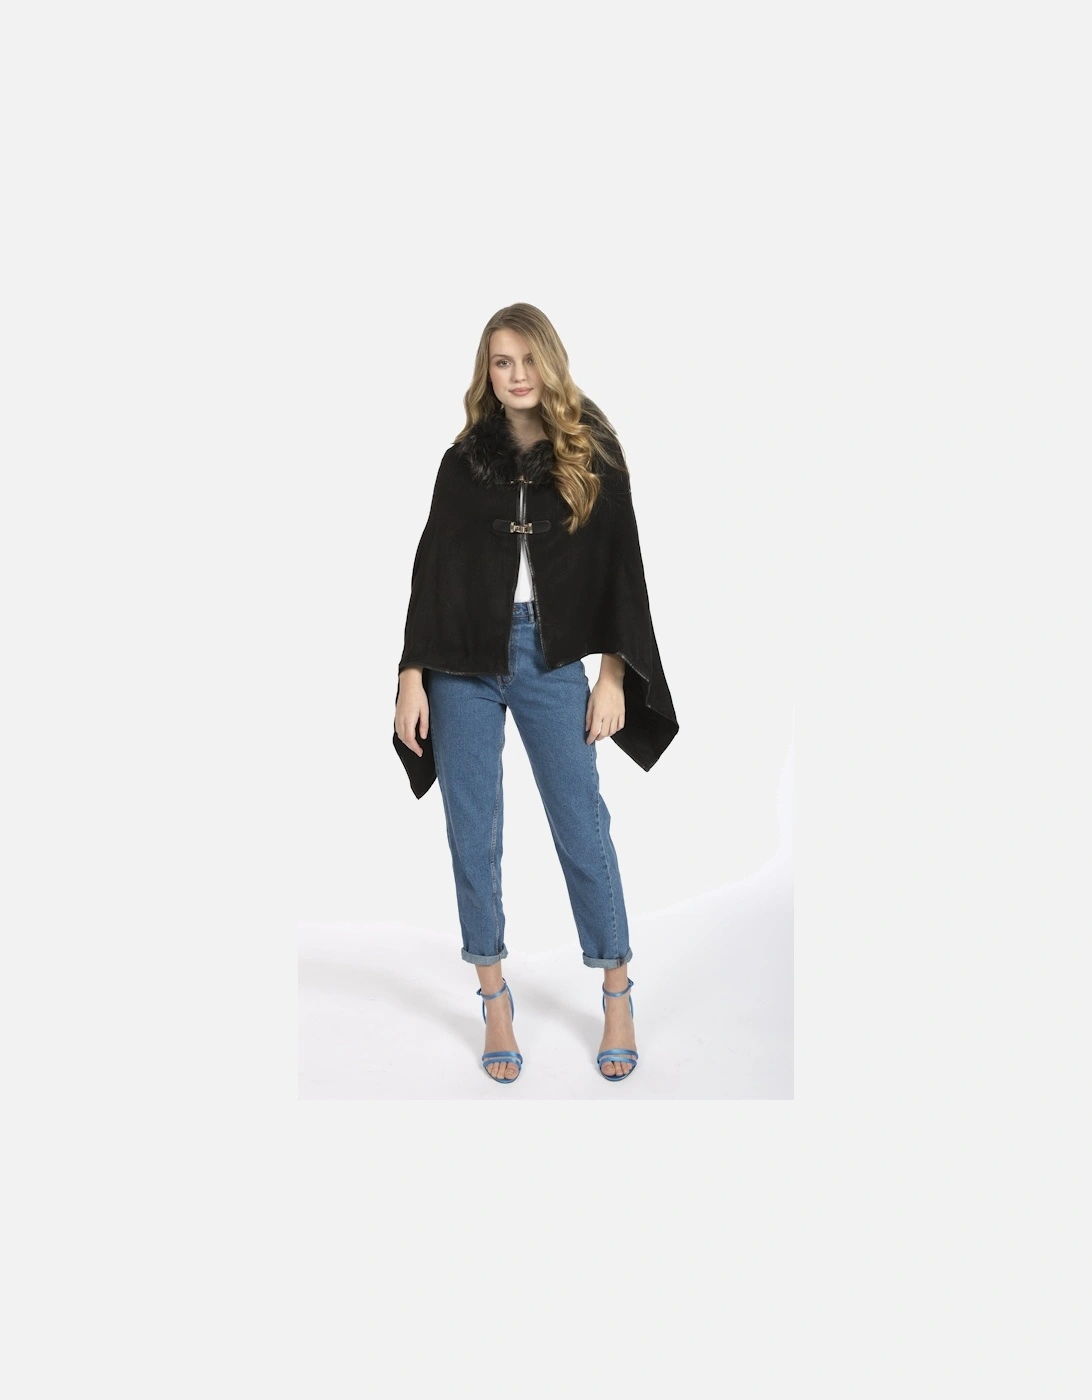 Black Cropped Cashmere Blend Cape with Hood